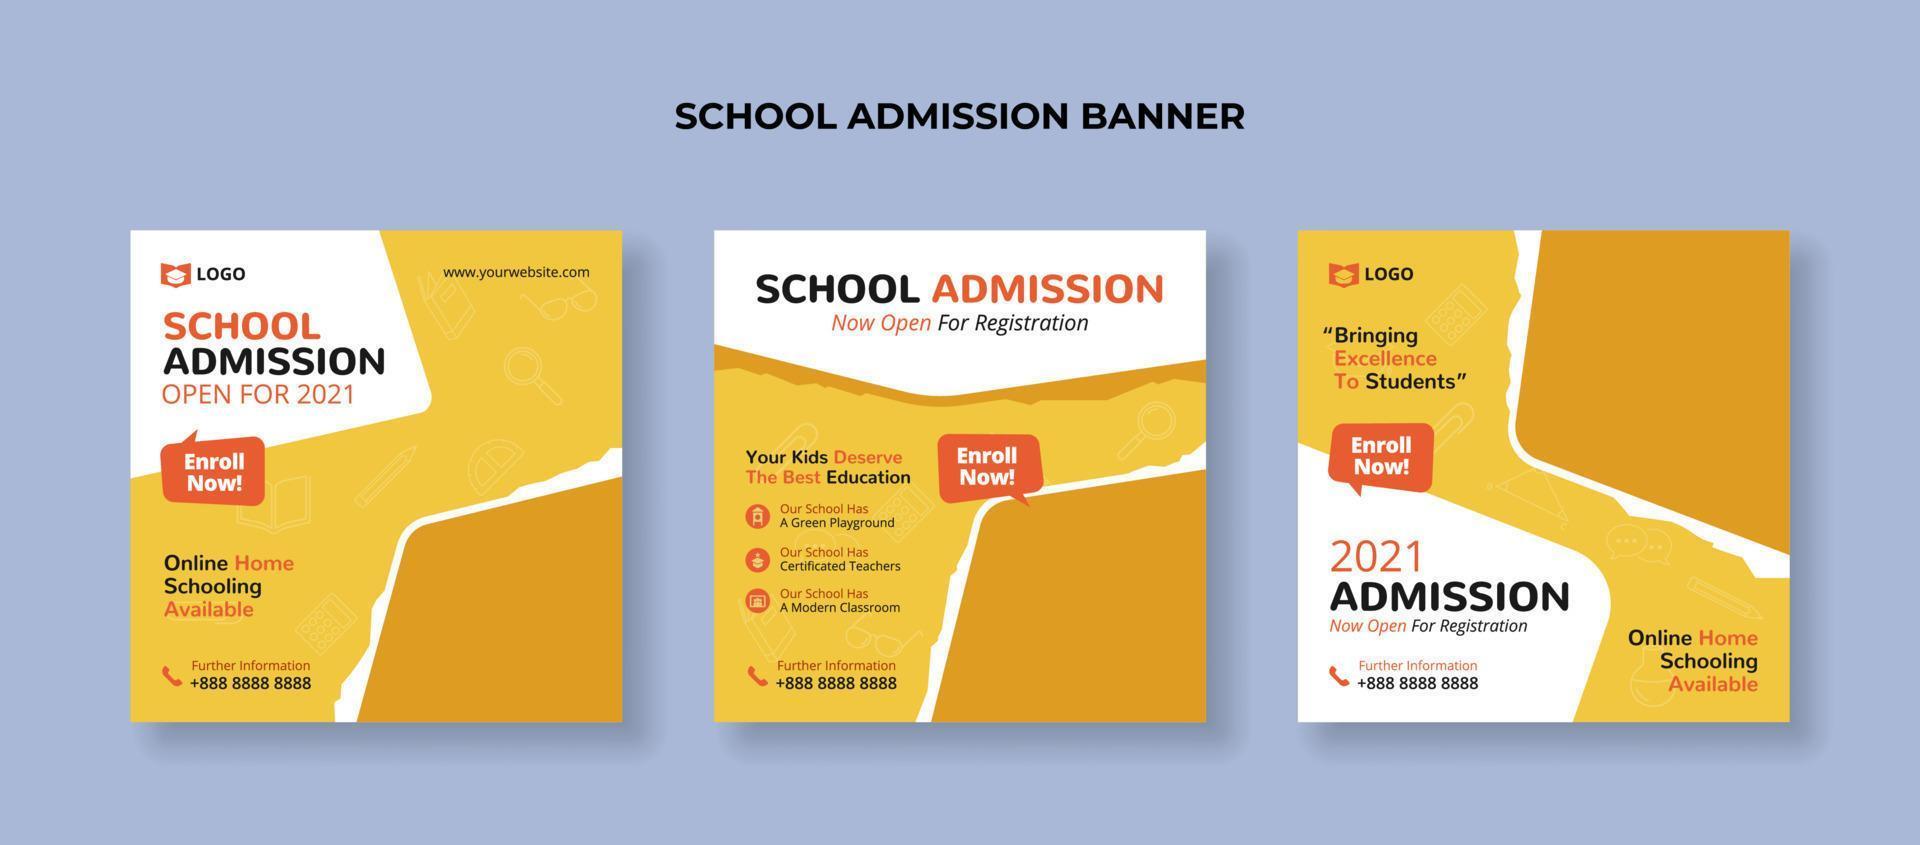 School admission square banner. Suitable for educational banner and social media post template vector